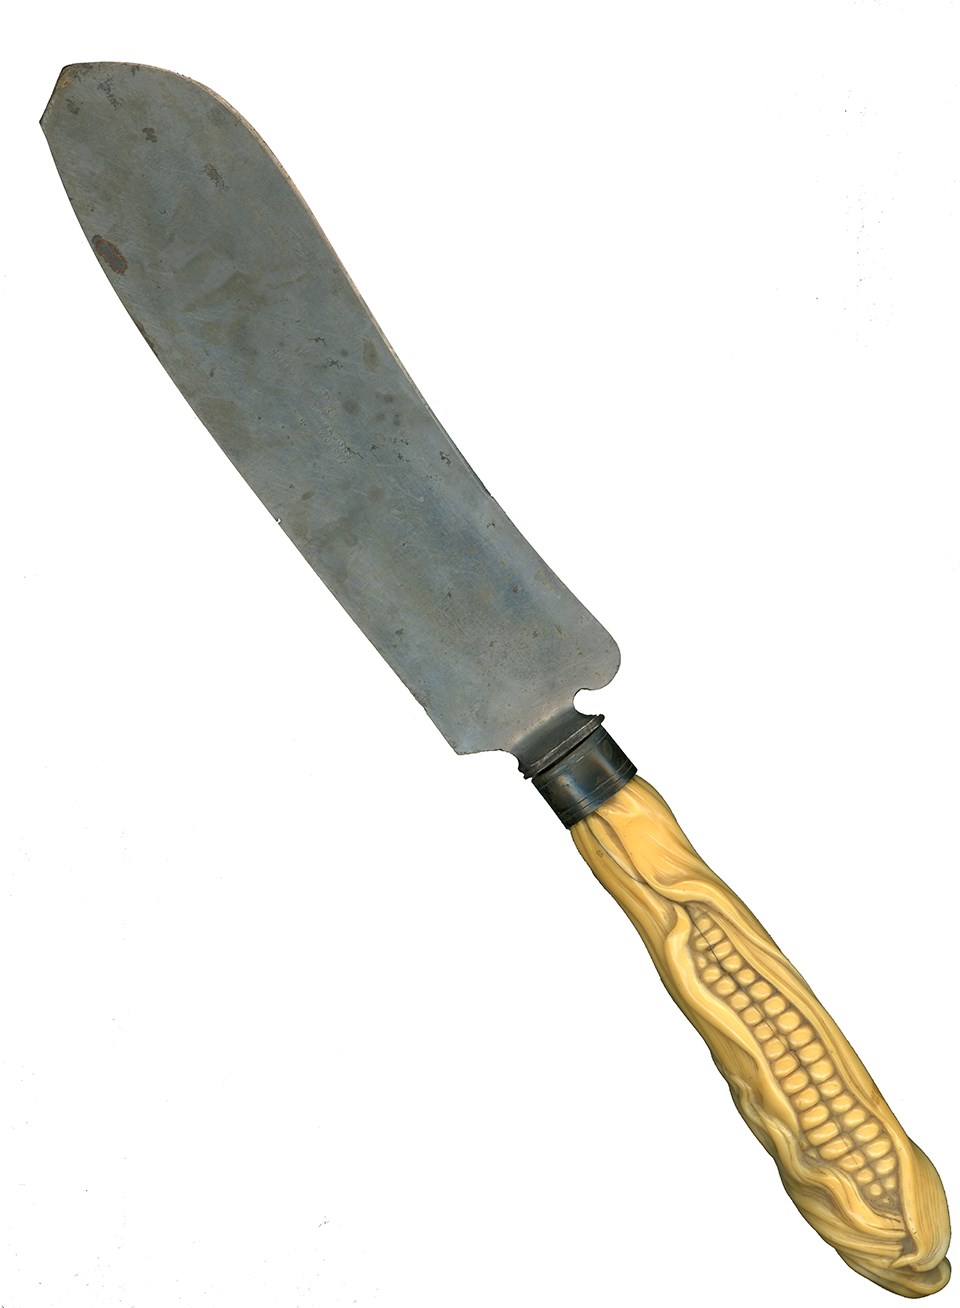 A bread knife with a handle shaped in the form of an ear of corn.